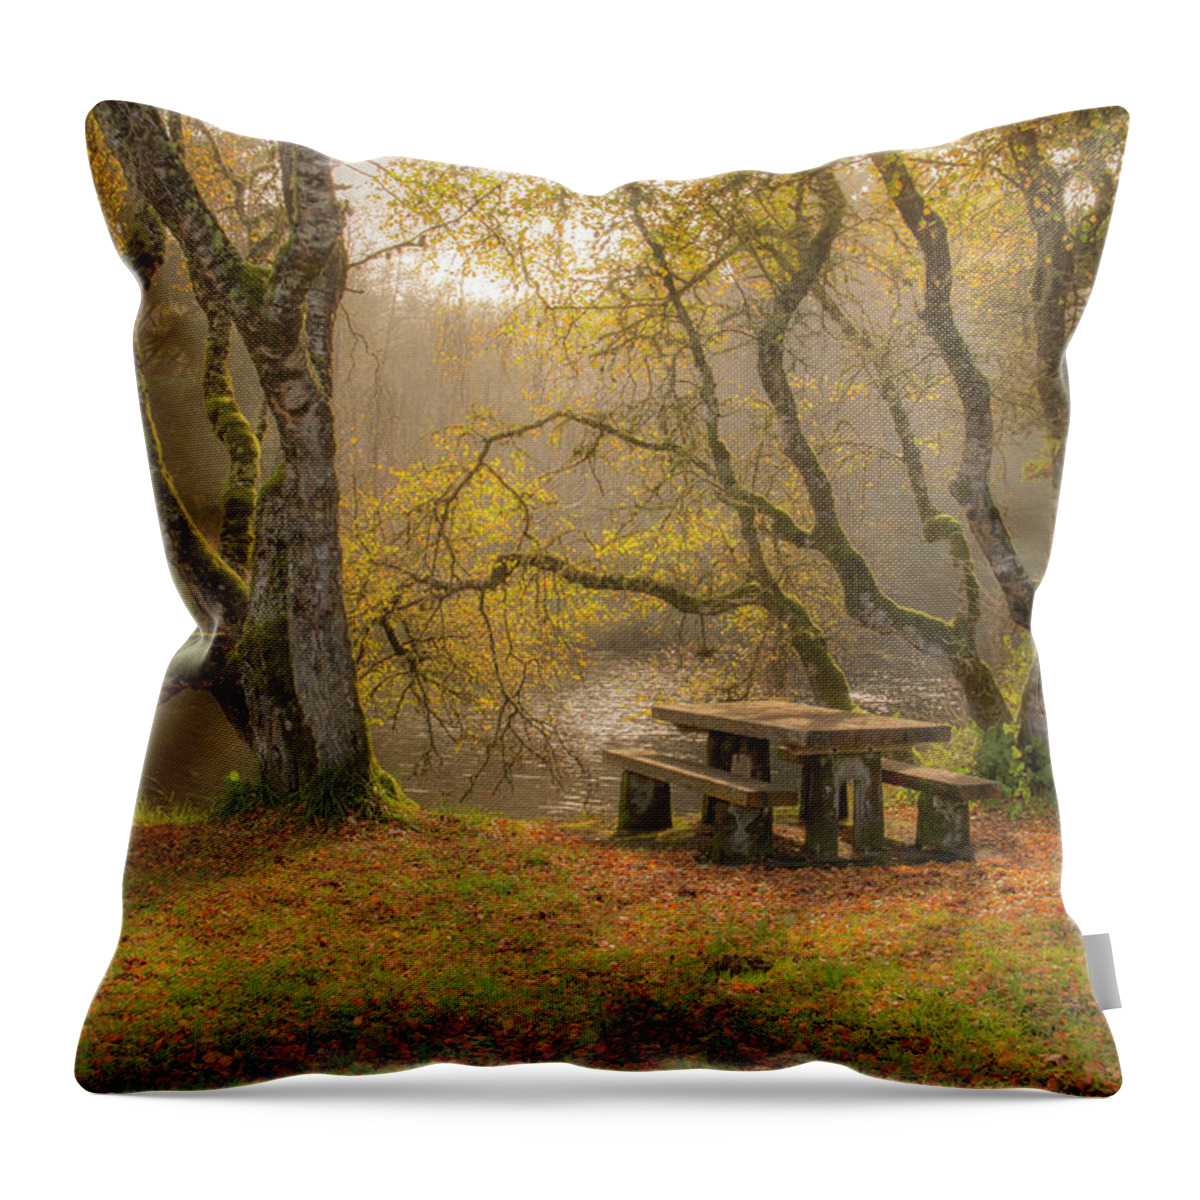 Autumn Throw Pillow featuring the photograph Autumn Picnic 0687 by Kristina Rinell